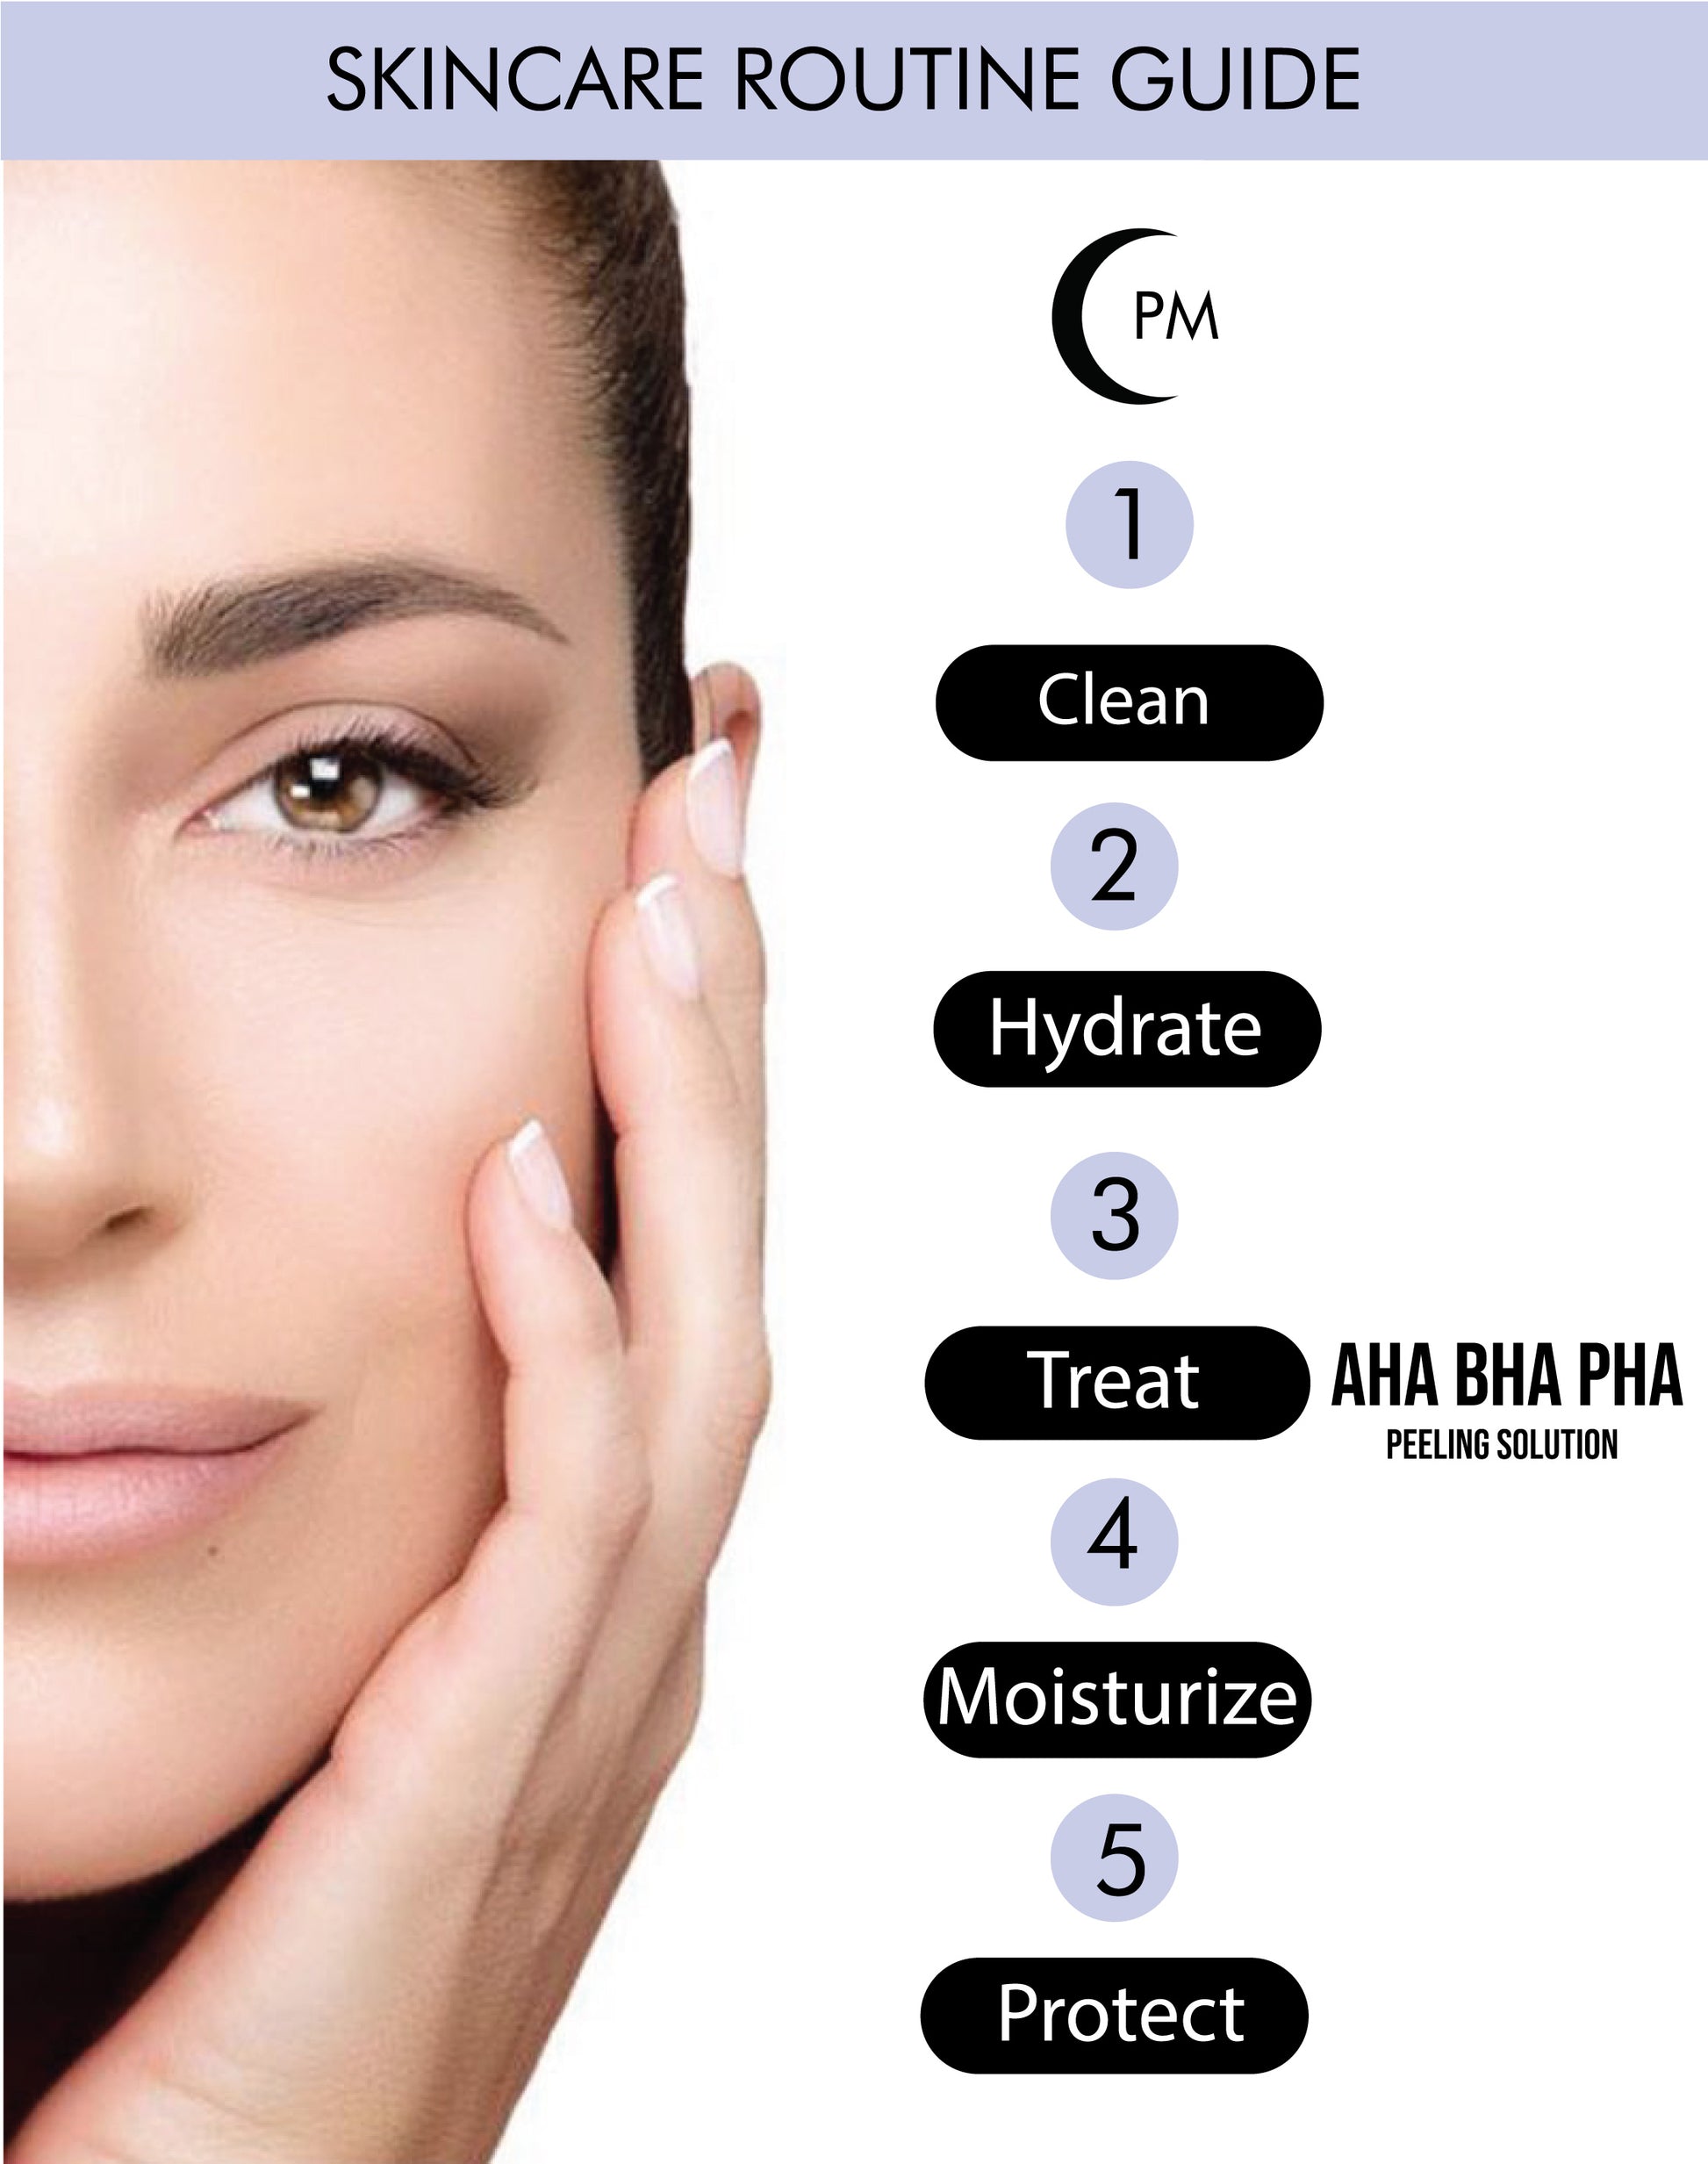 AHA BHA PHA 30% Skin Care Routine Guide - The True Therapy